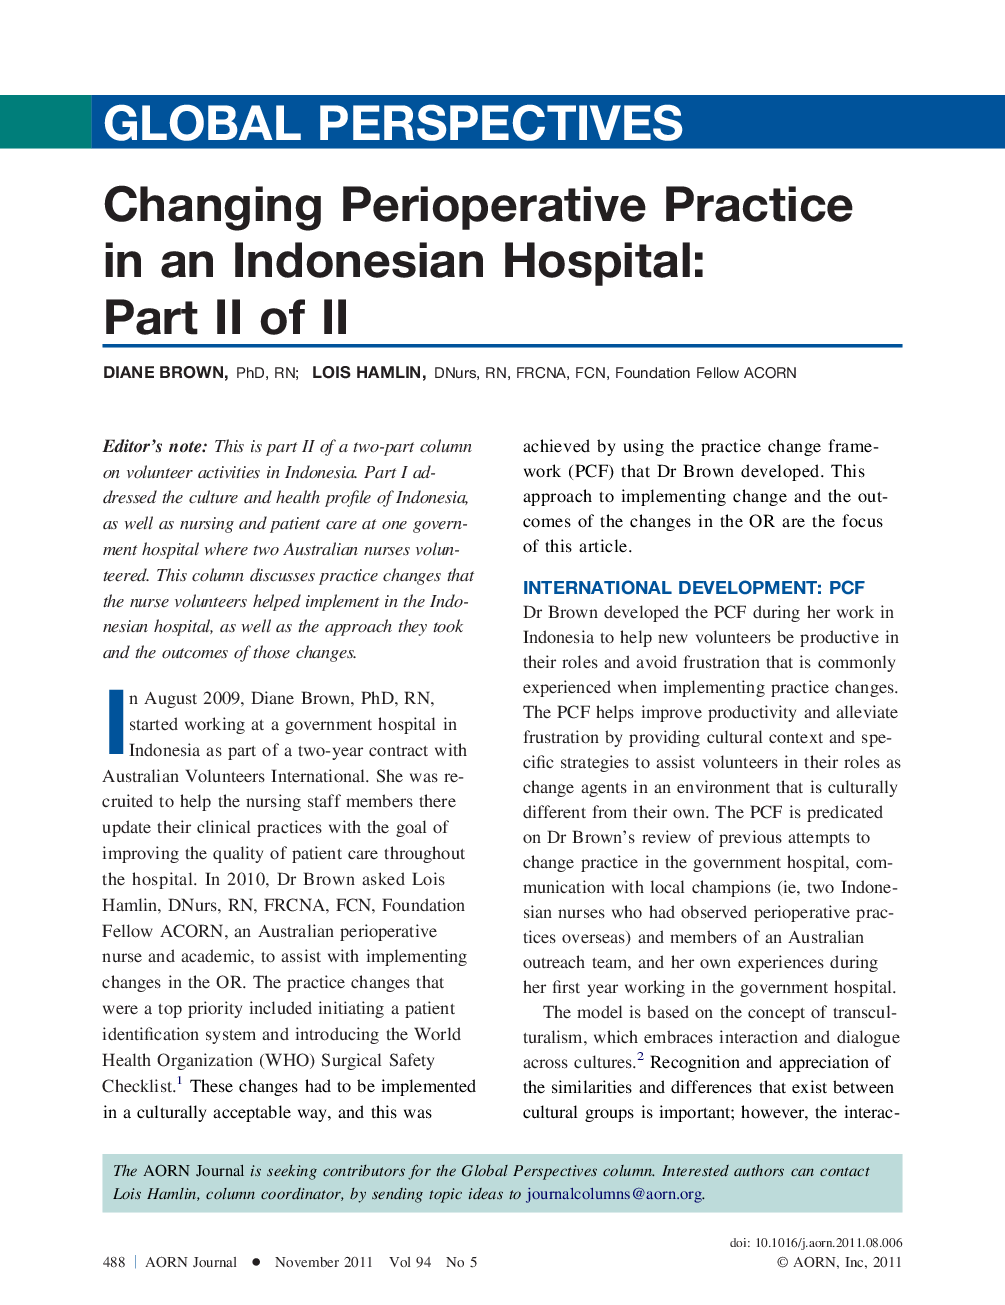 Changing Perioperative Practice in an Indonesian Hospital: Part II of II